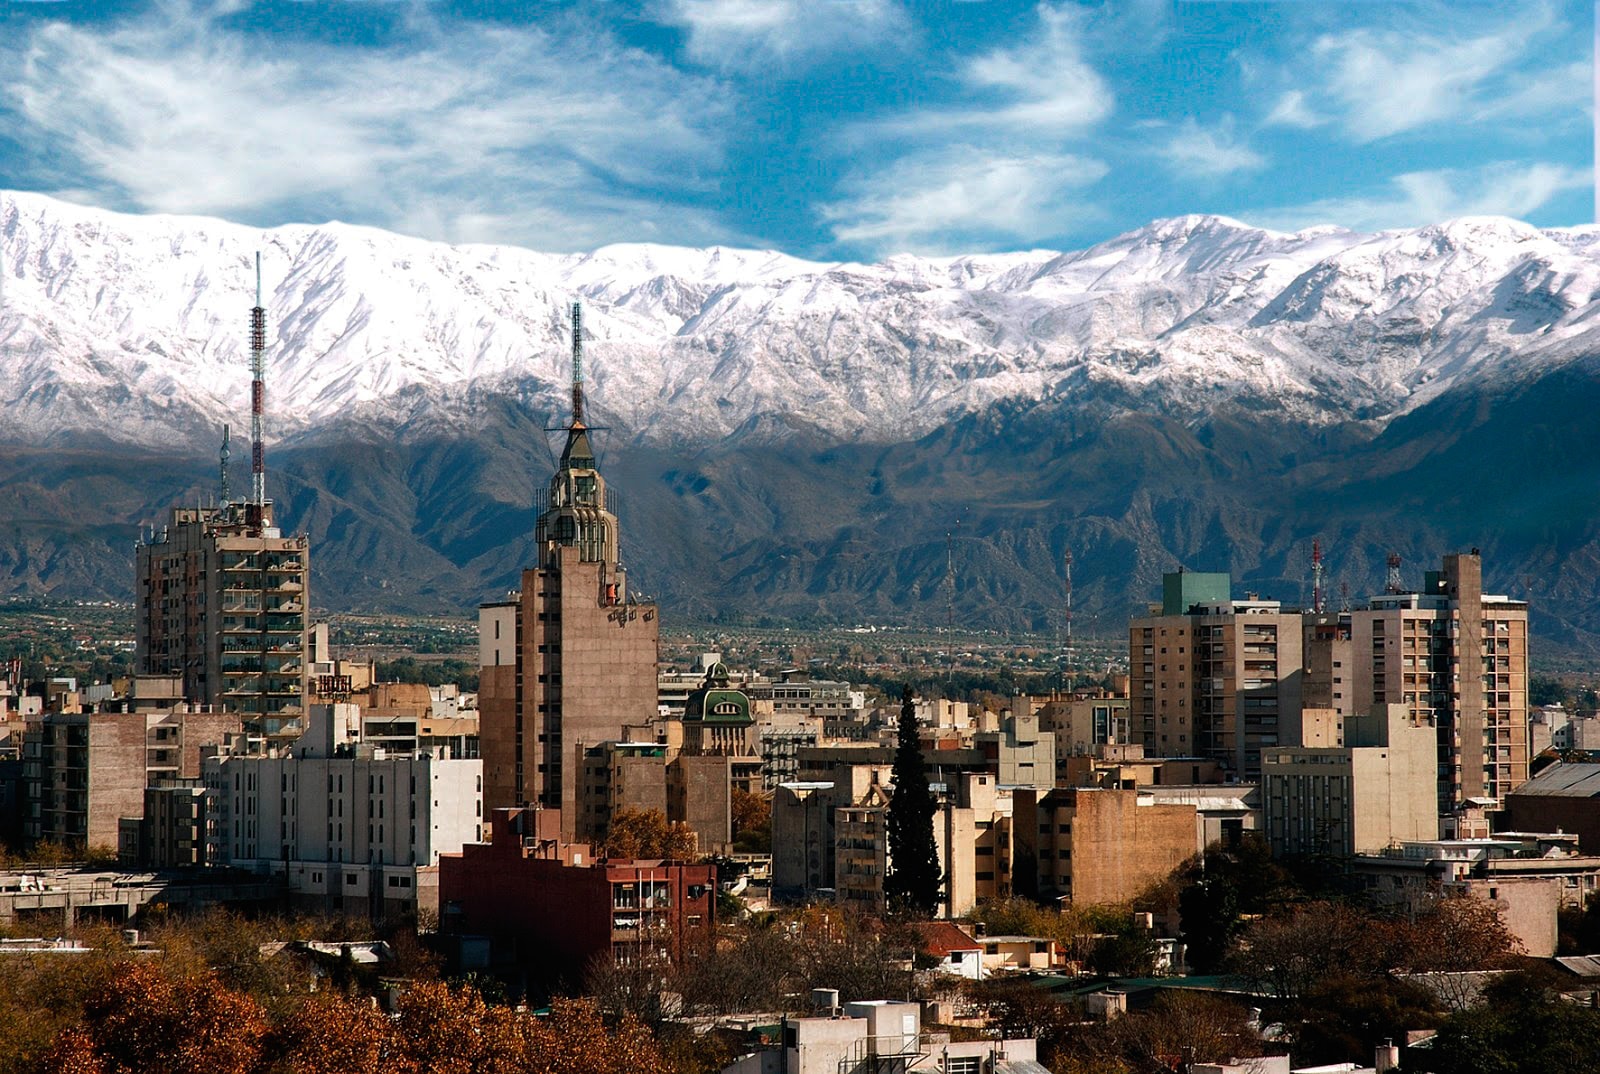 City of Mendoza with the Andes in the background, Argentina